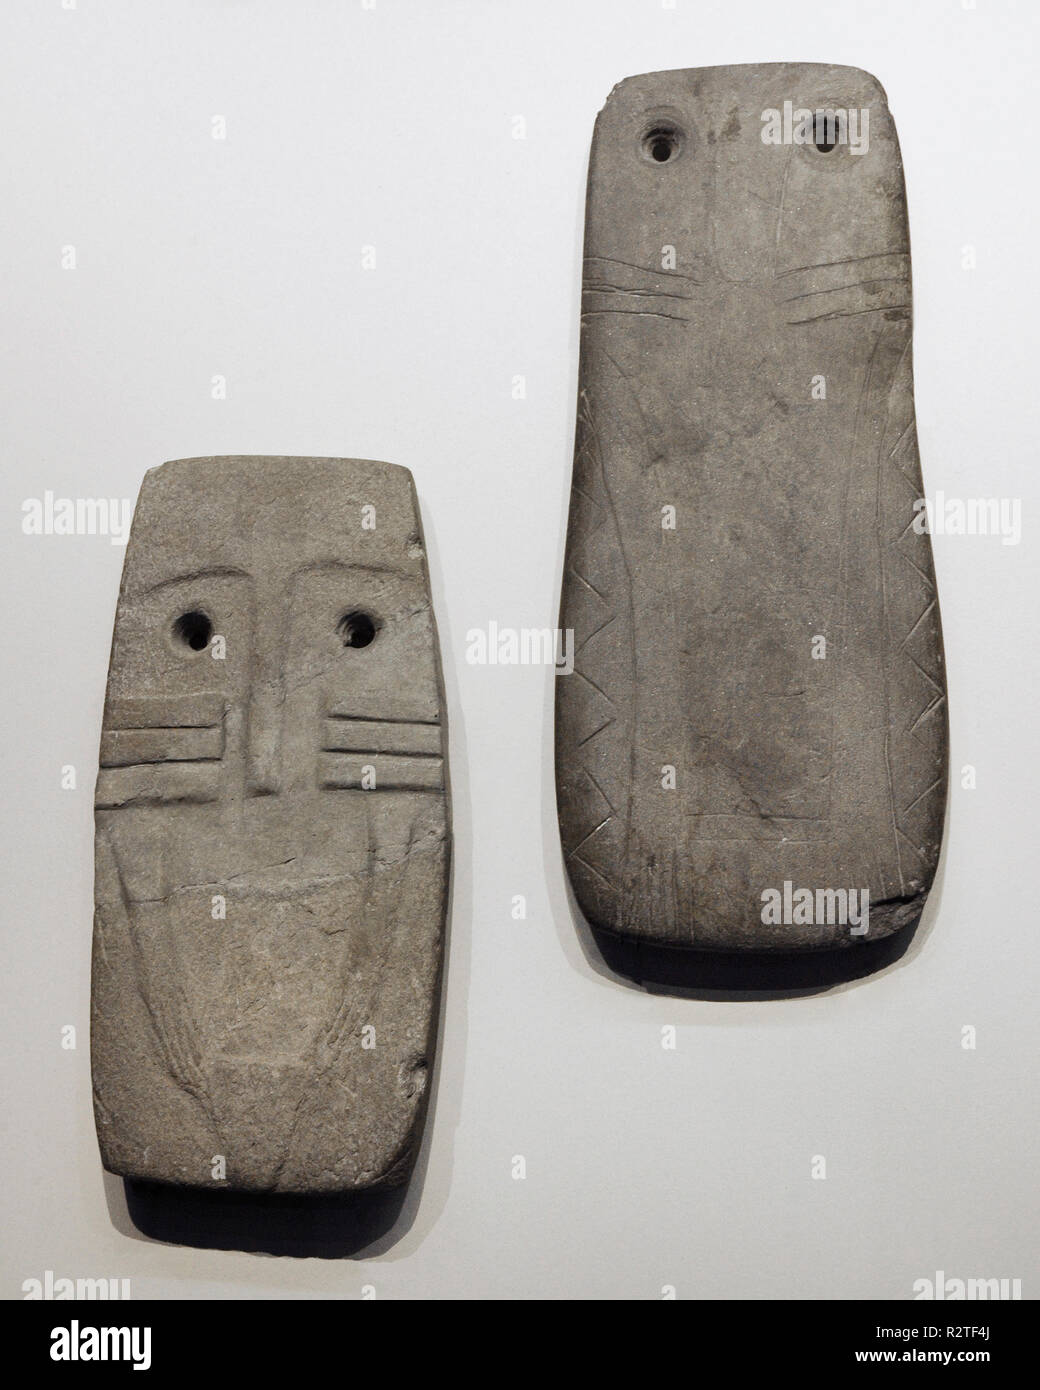 Left: Idol-plate anthropomorphic. 3750-2500 BC. Chalcolithic. From the Dolmen of Garrovillas (Garrovillas de Alconetar, province of Caceres, Extremadura). Right: Idol-plate anthropomorphic. Chalcolithic. From Barbacena (Elvas, Portugal). National Archaeological Museum. Madrid. Spain. Stock Photo